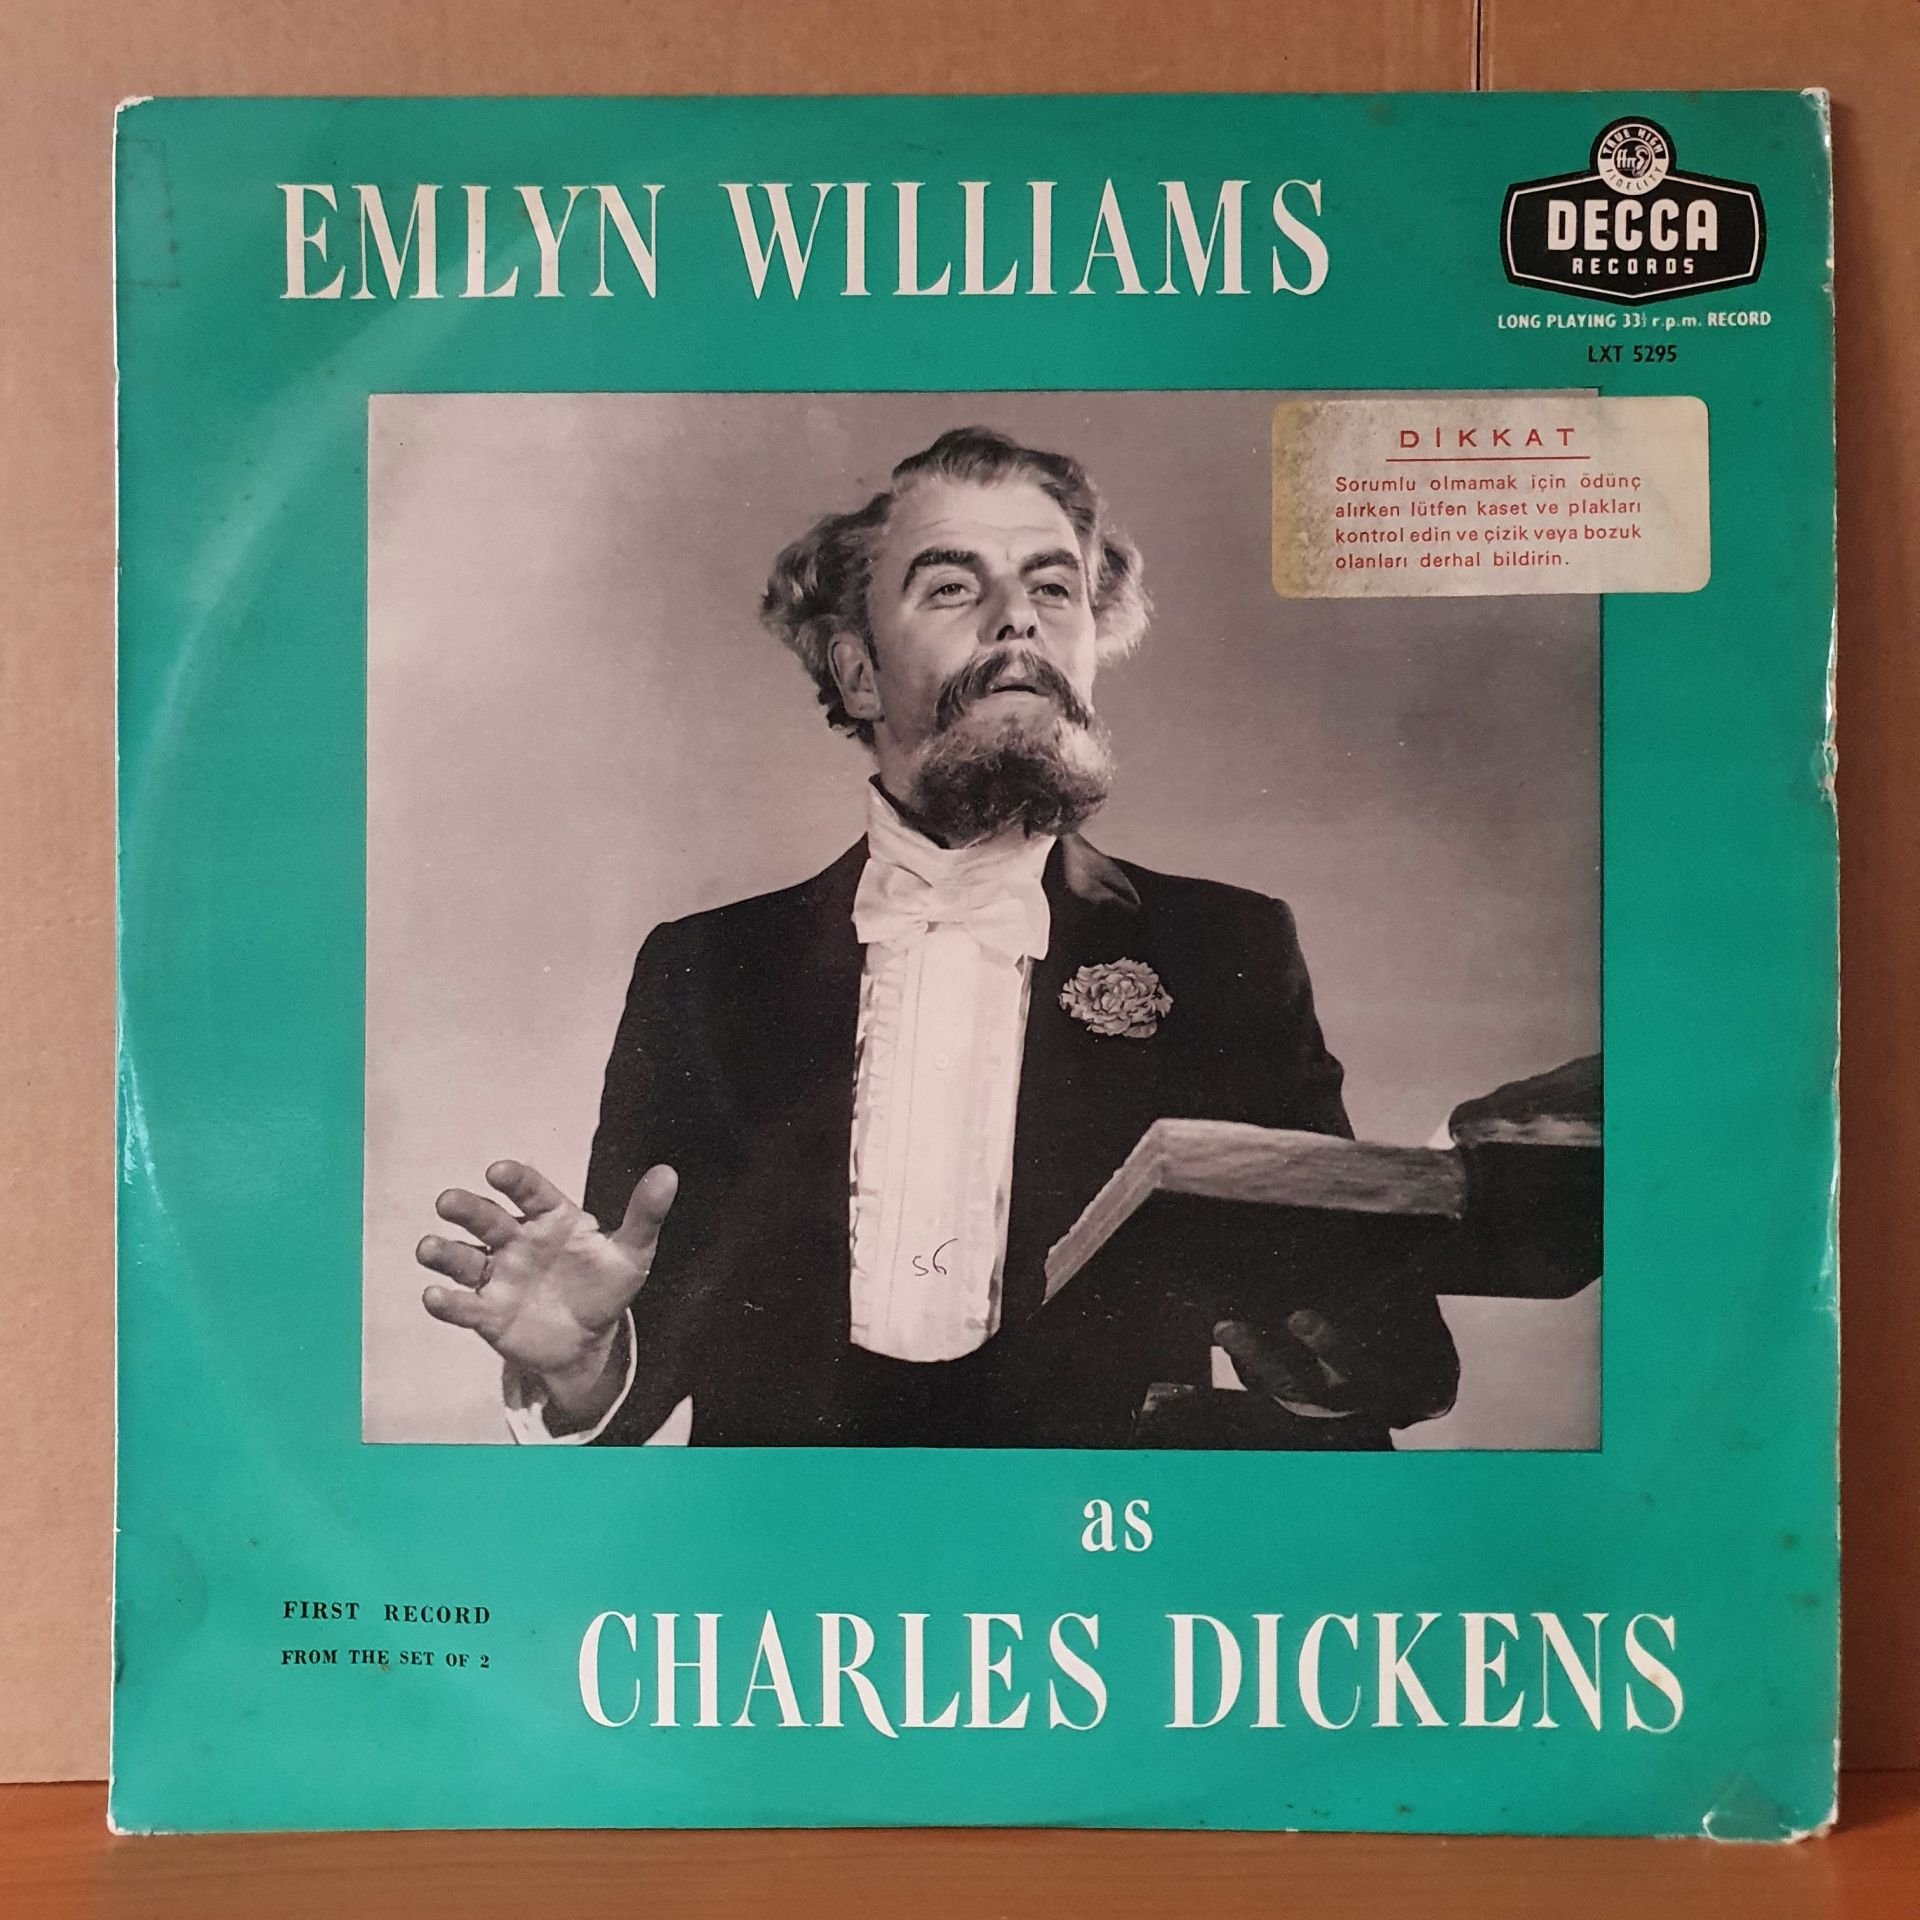 EMLYN WILLIAMS - AS CHARLES DICKENS / FIRST RECORD FROM THE SET OF 2 (1956) - LP 2.EL PLAK